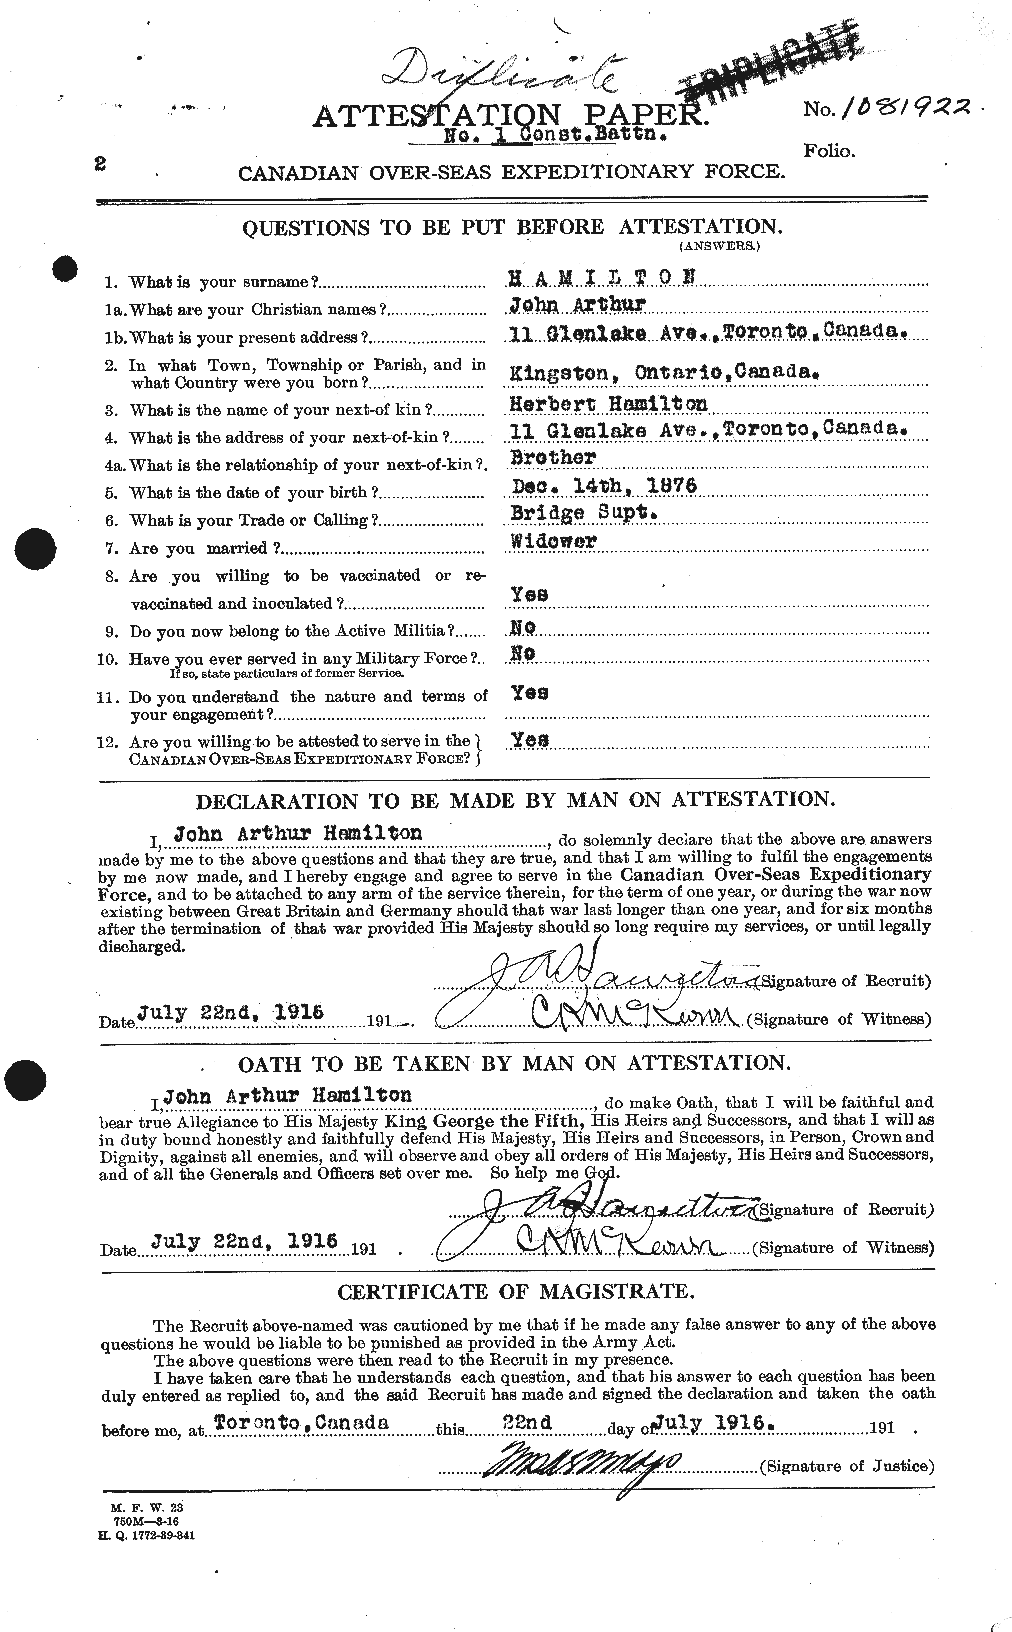 Personnel Records of the First World War - CEF 373067a